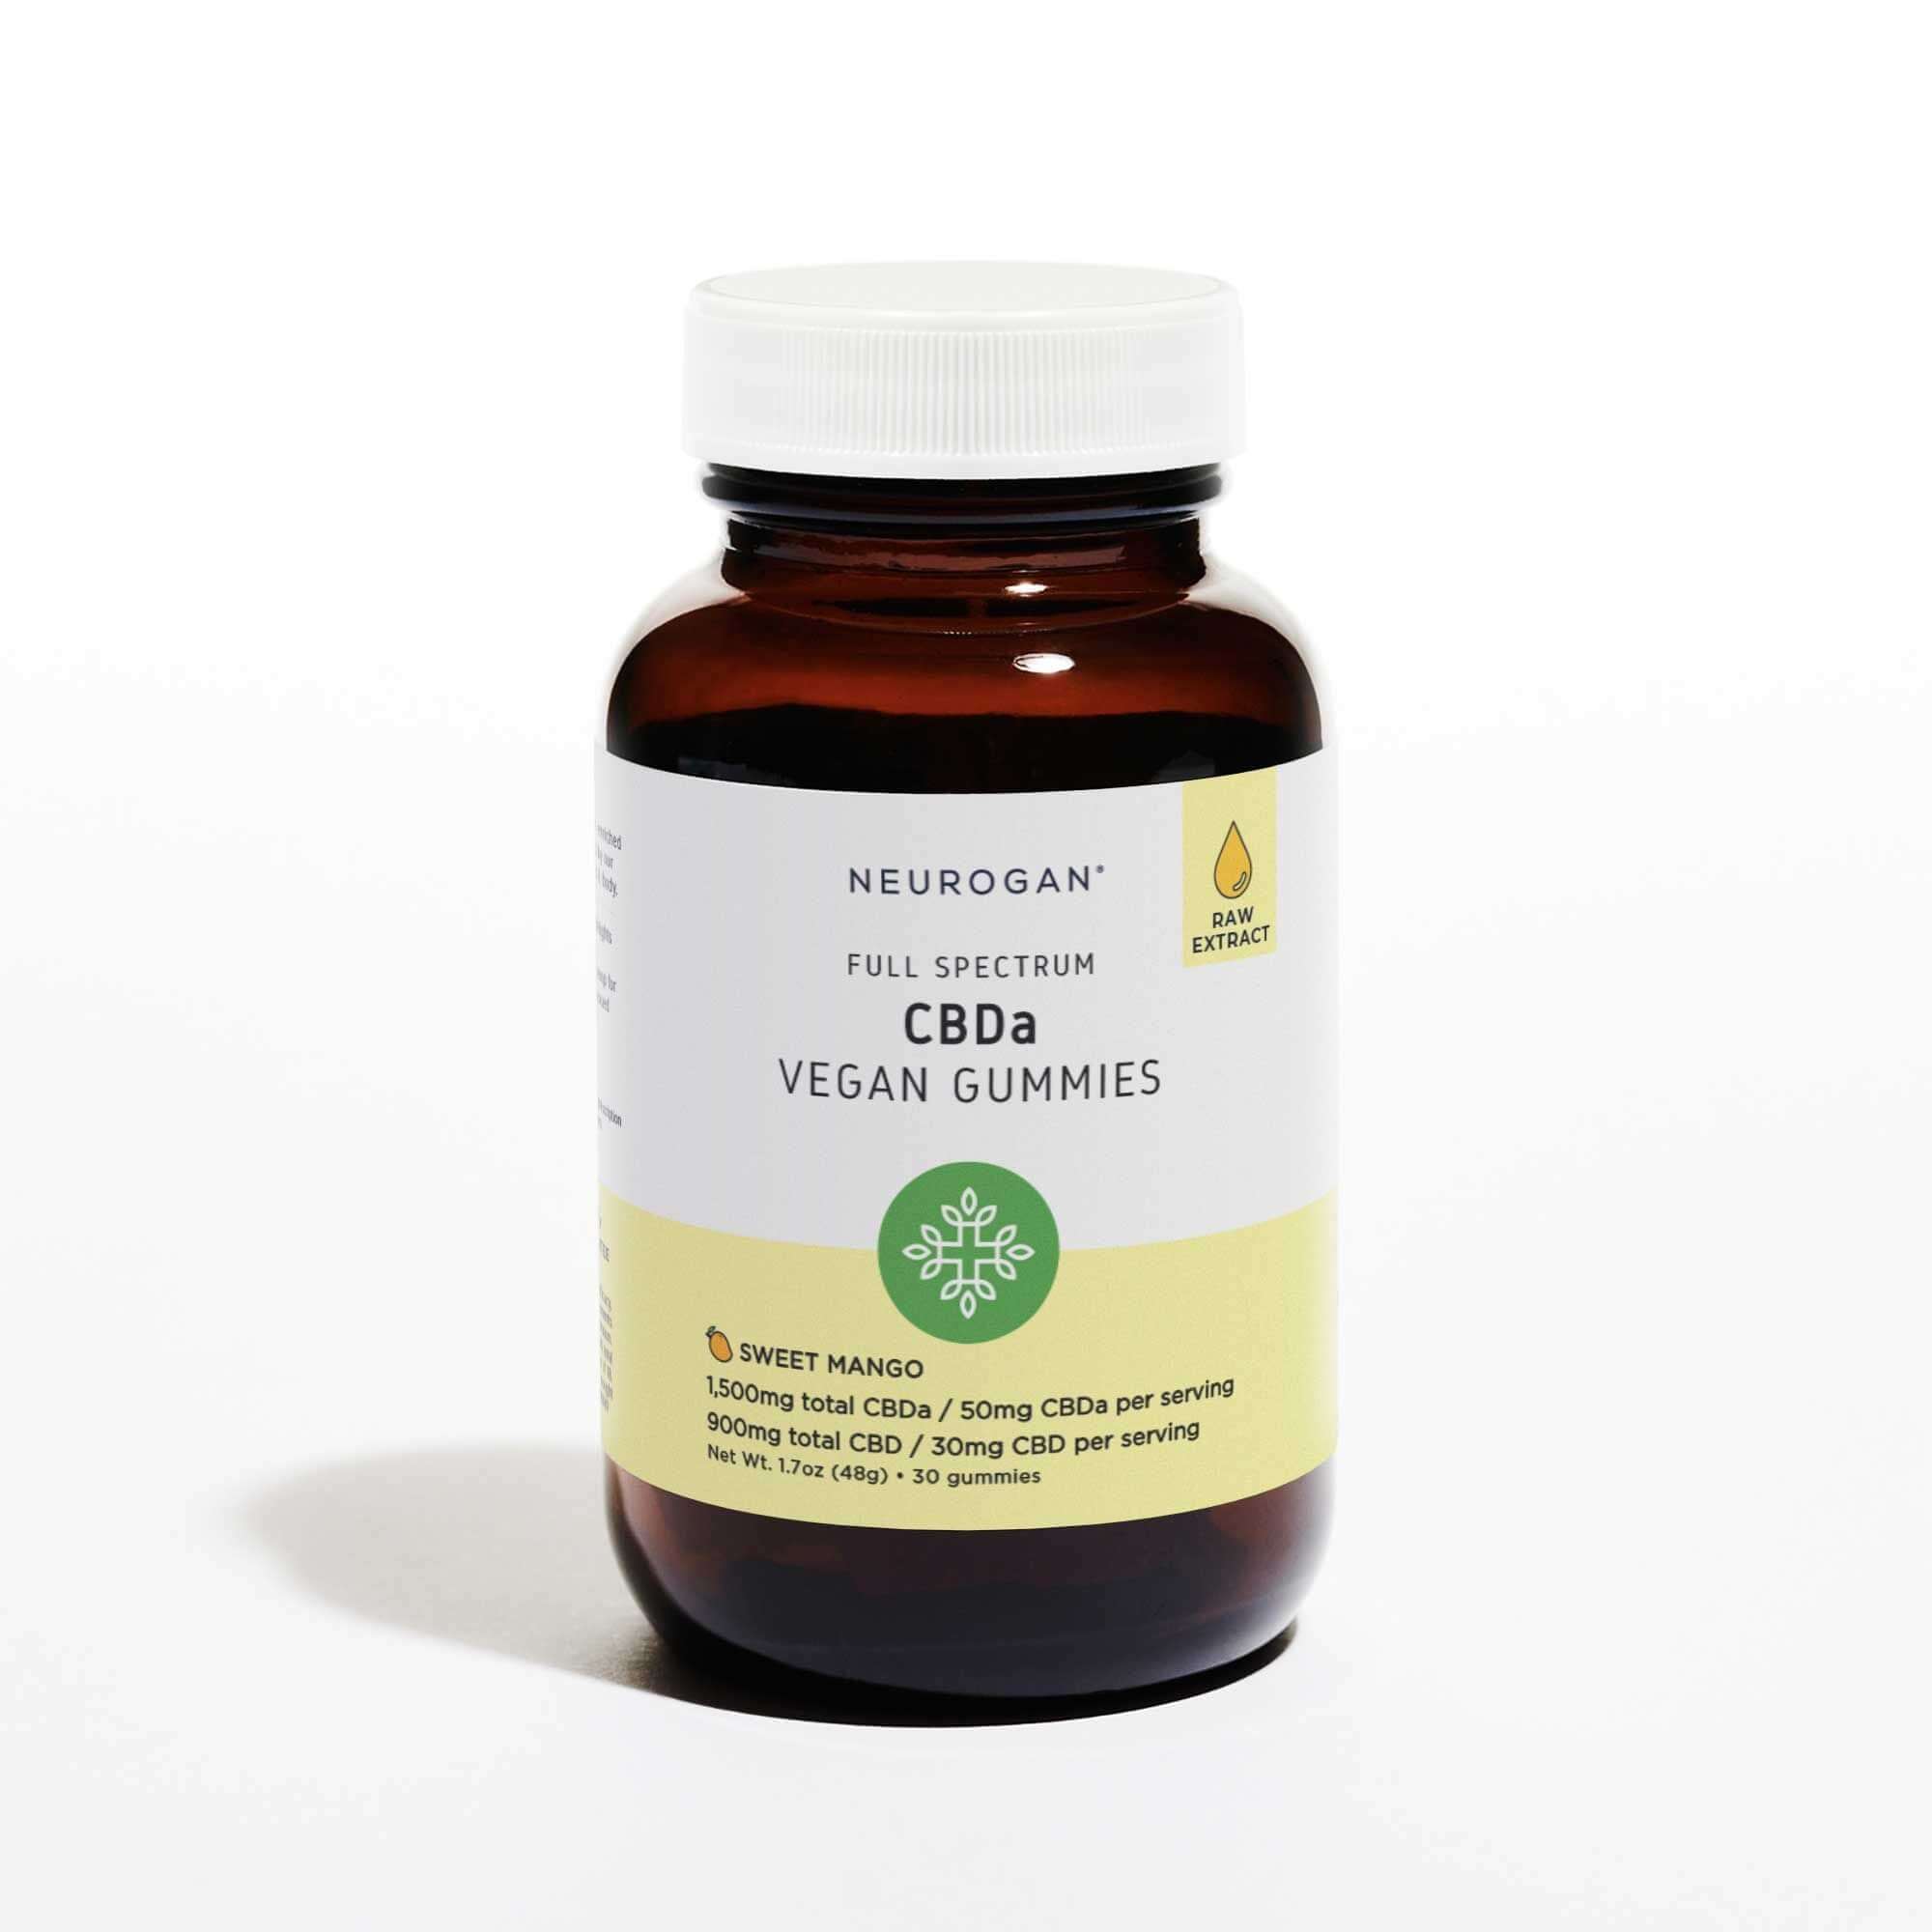 A bottle of CBDa gummies, sweet mango flavored, white top lid, and label including total mg of CBD and CBDa